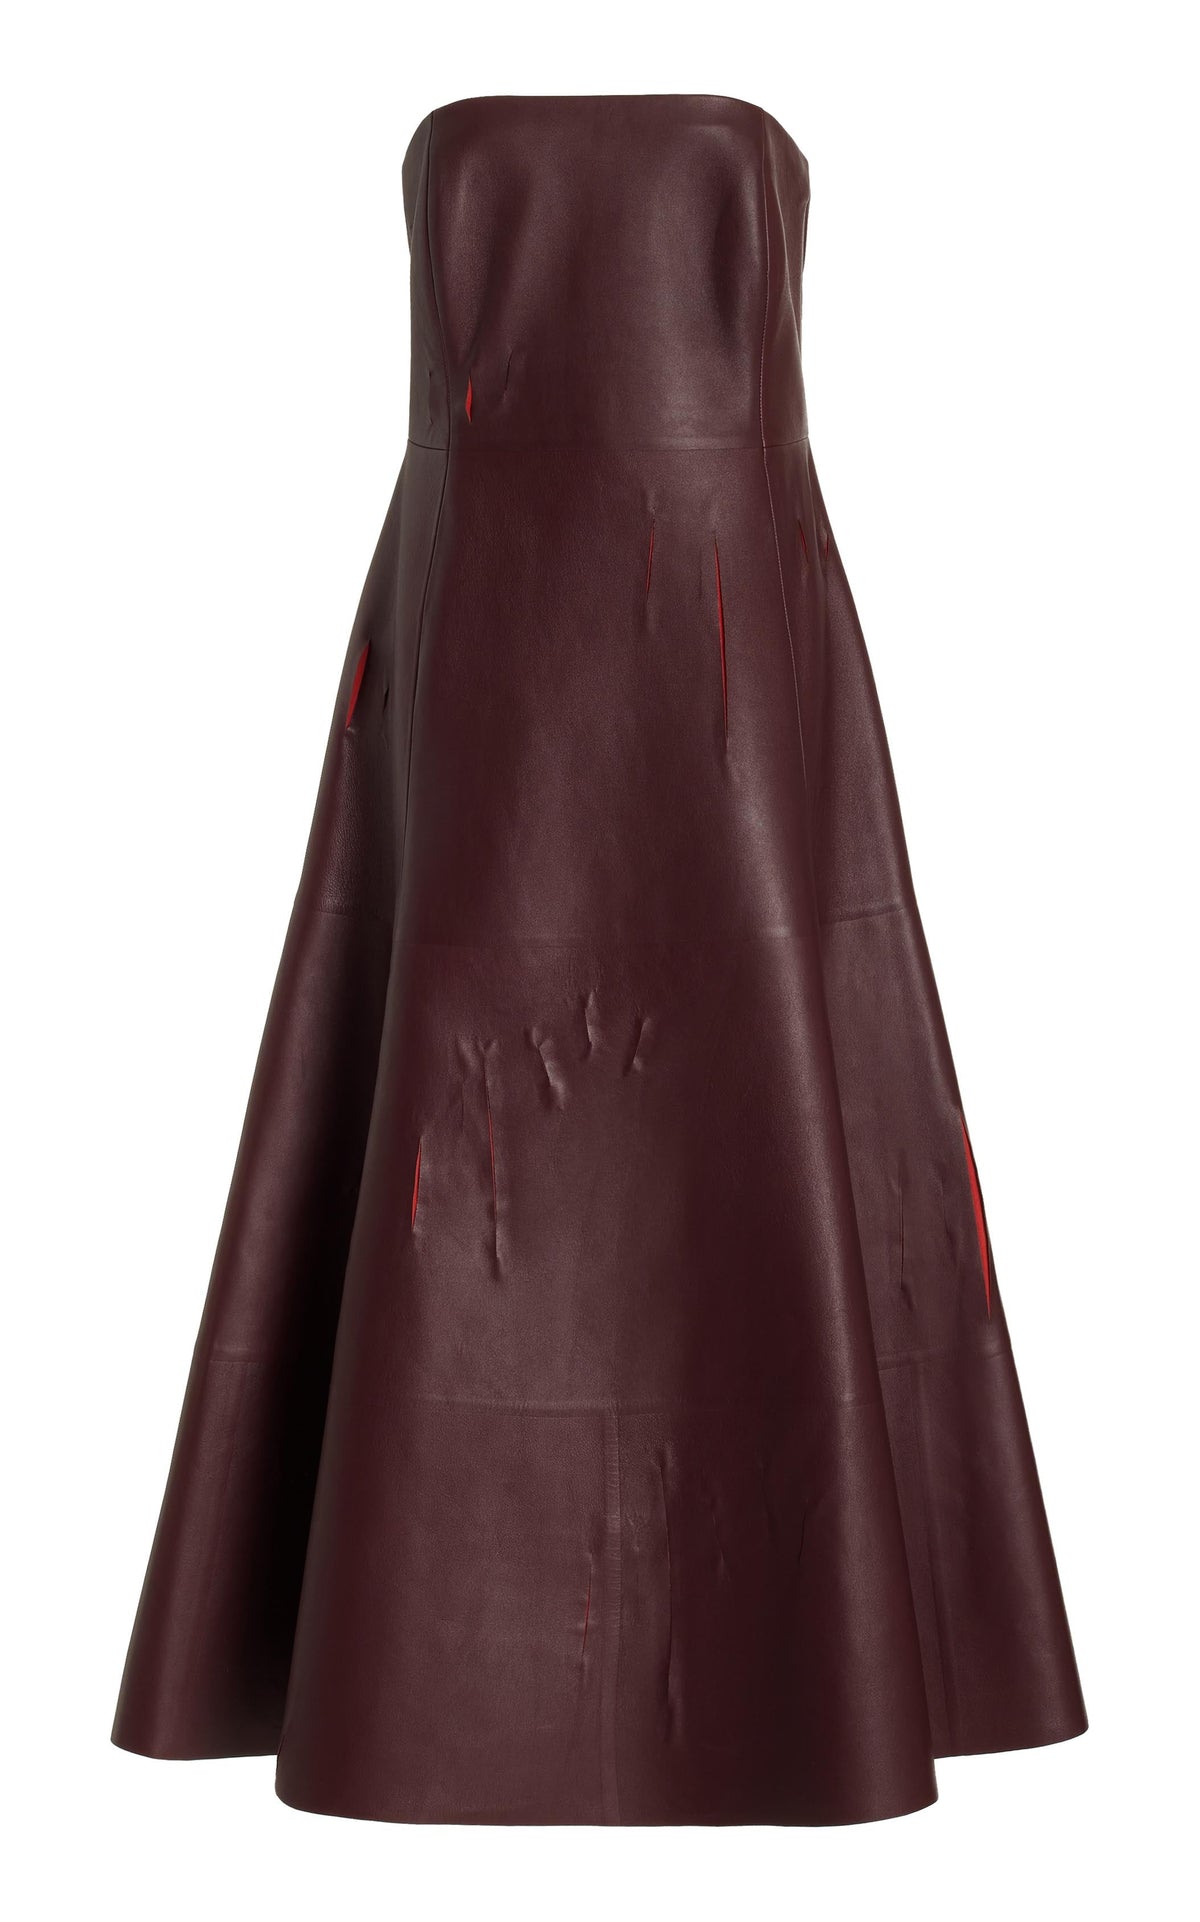 Athlone Dress in Leather